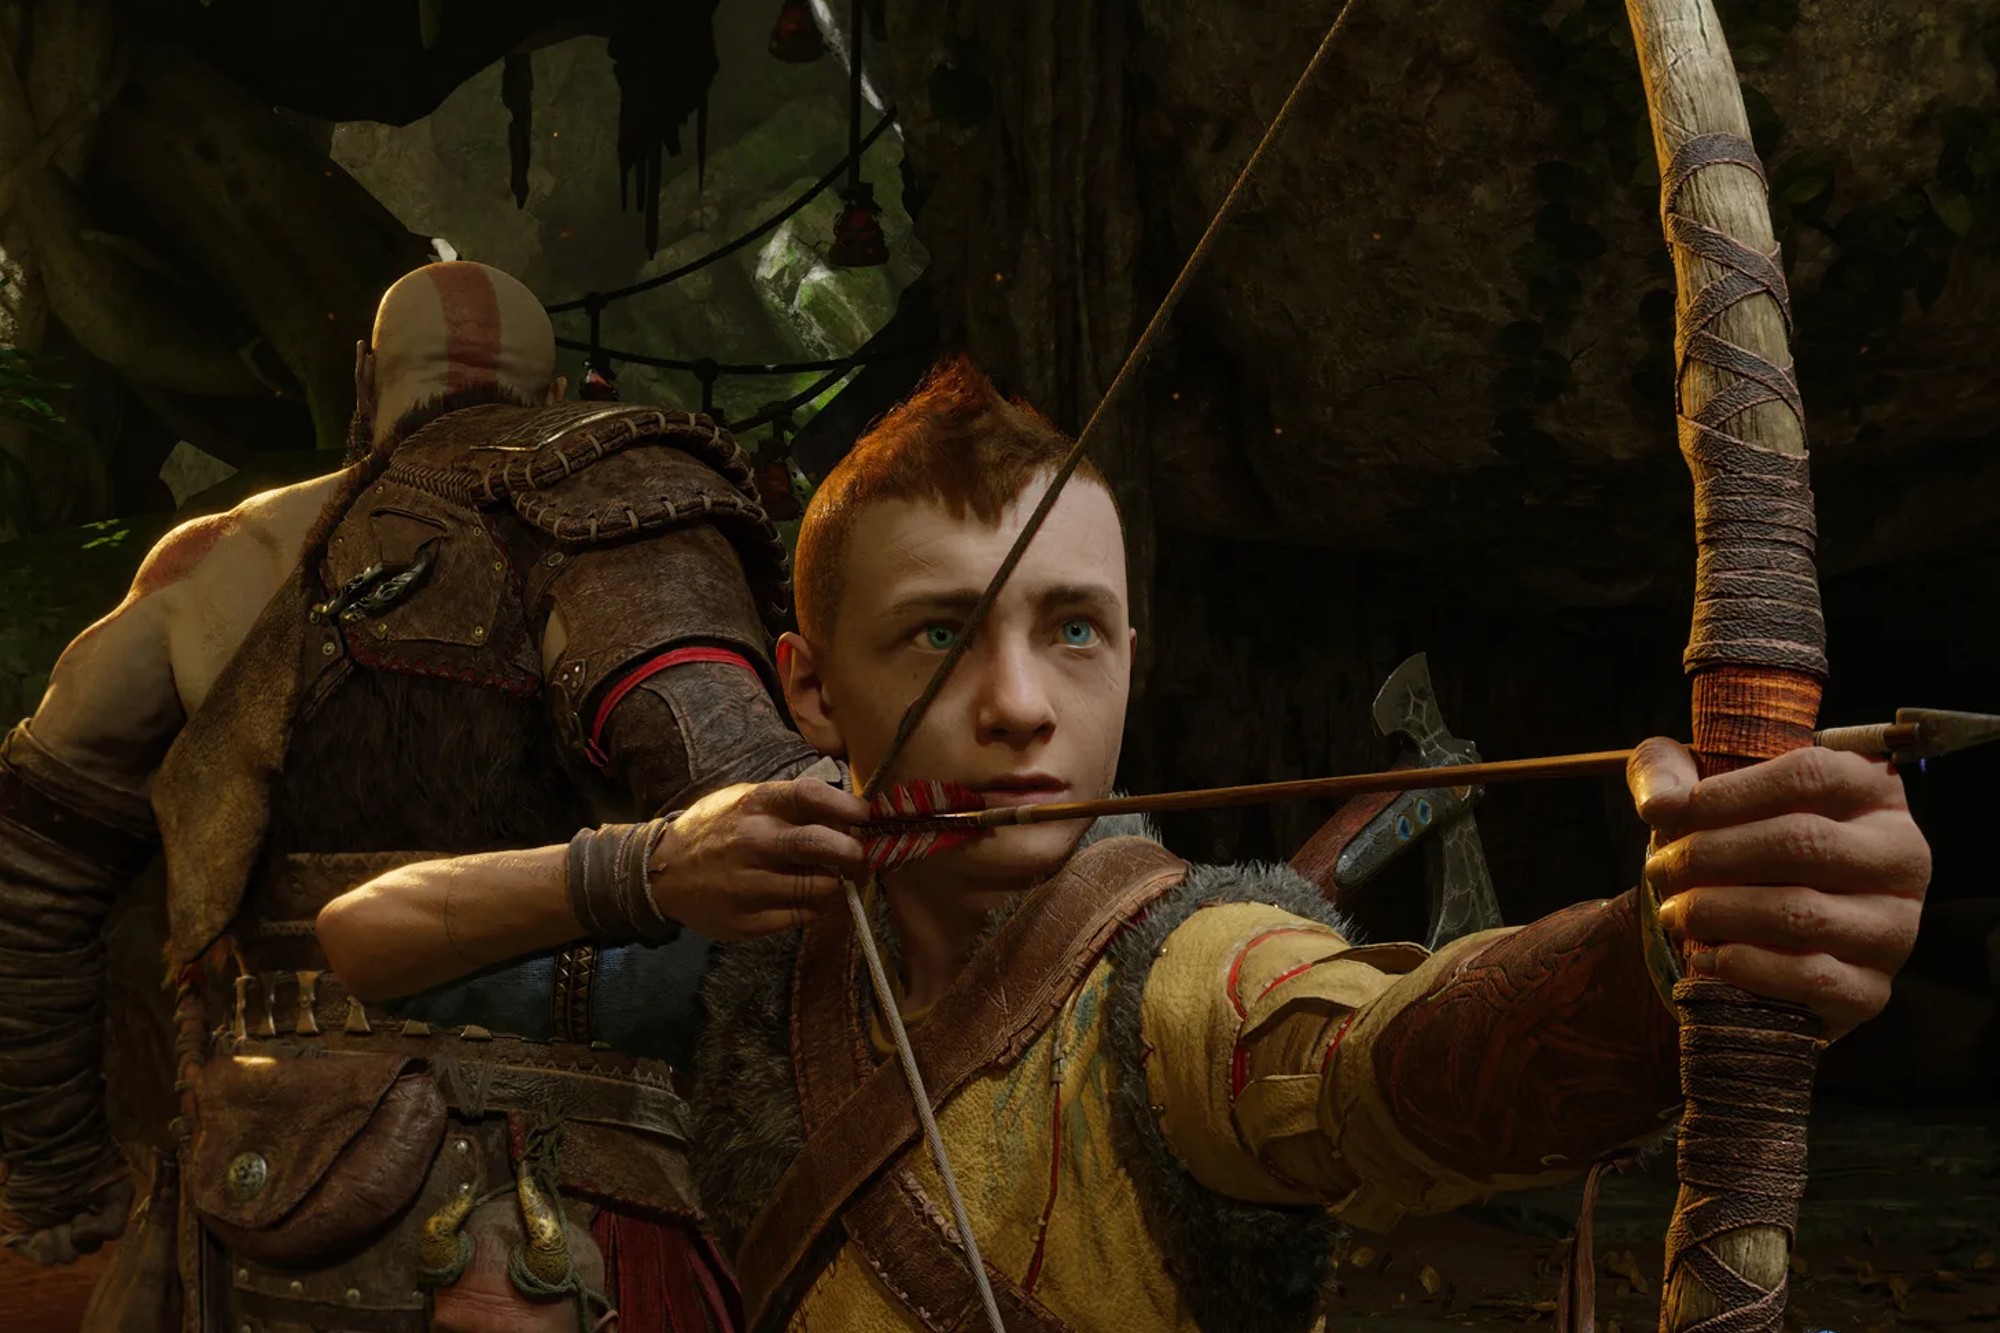 God of War: Ragnarok concludes September’s State of Play
triumphantly